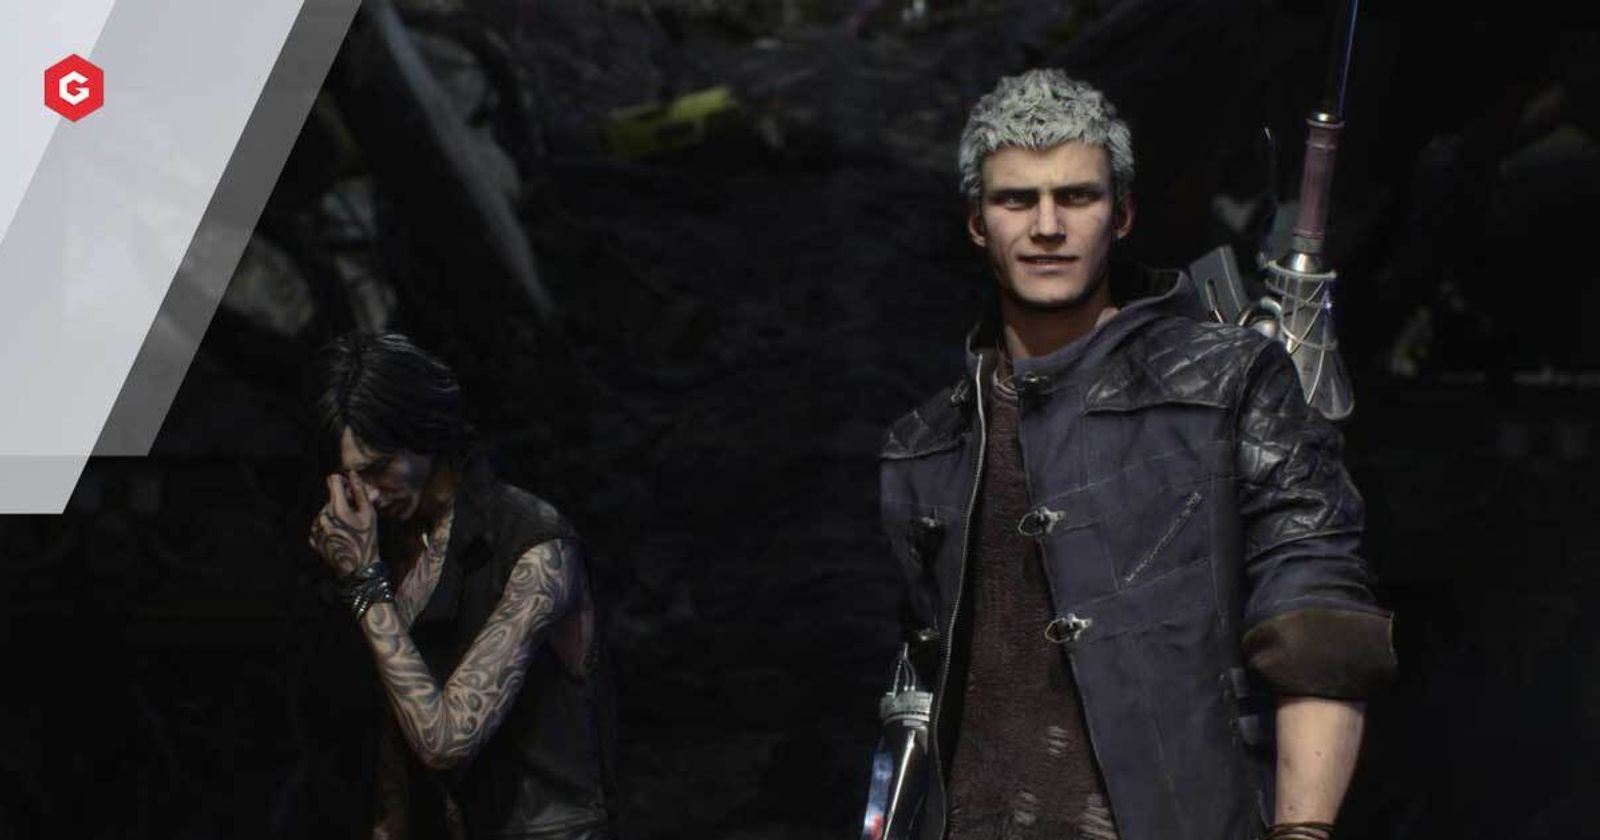 Dante's return in Devil May Cry 5 is the real deal - hands-on